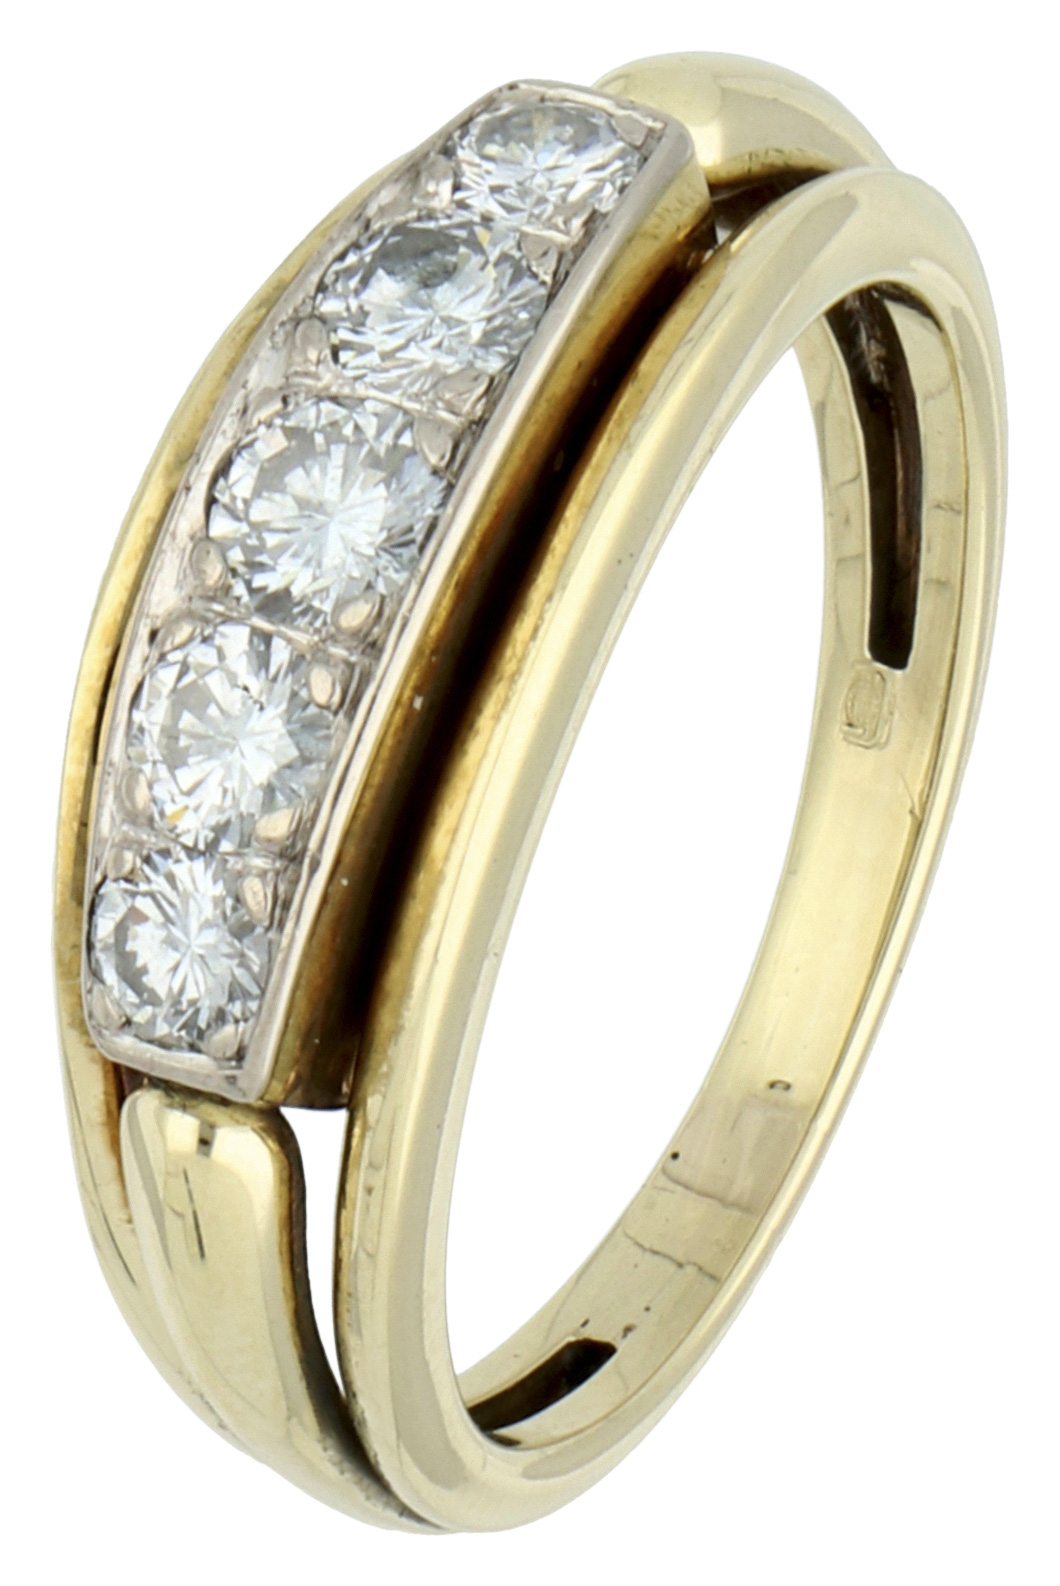 No Reserve - 14K Yellow gold demi-alliance ring set with approx. 0.48 ct. diamond.